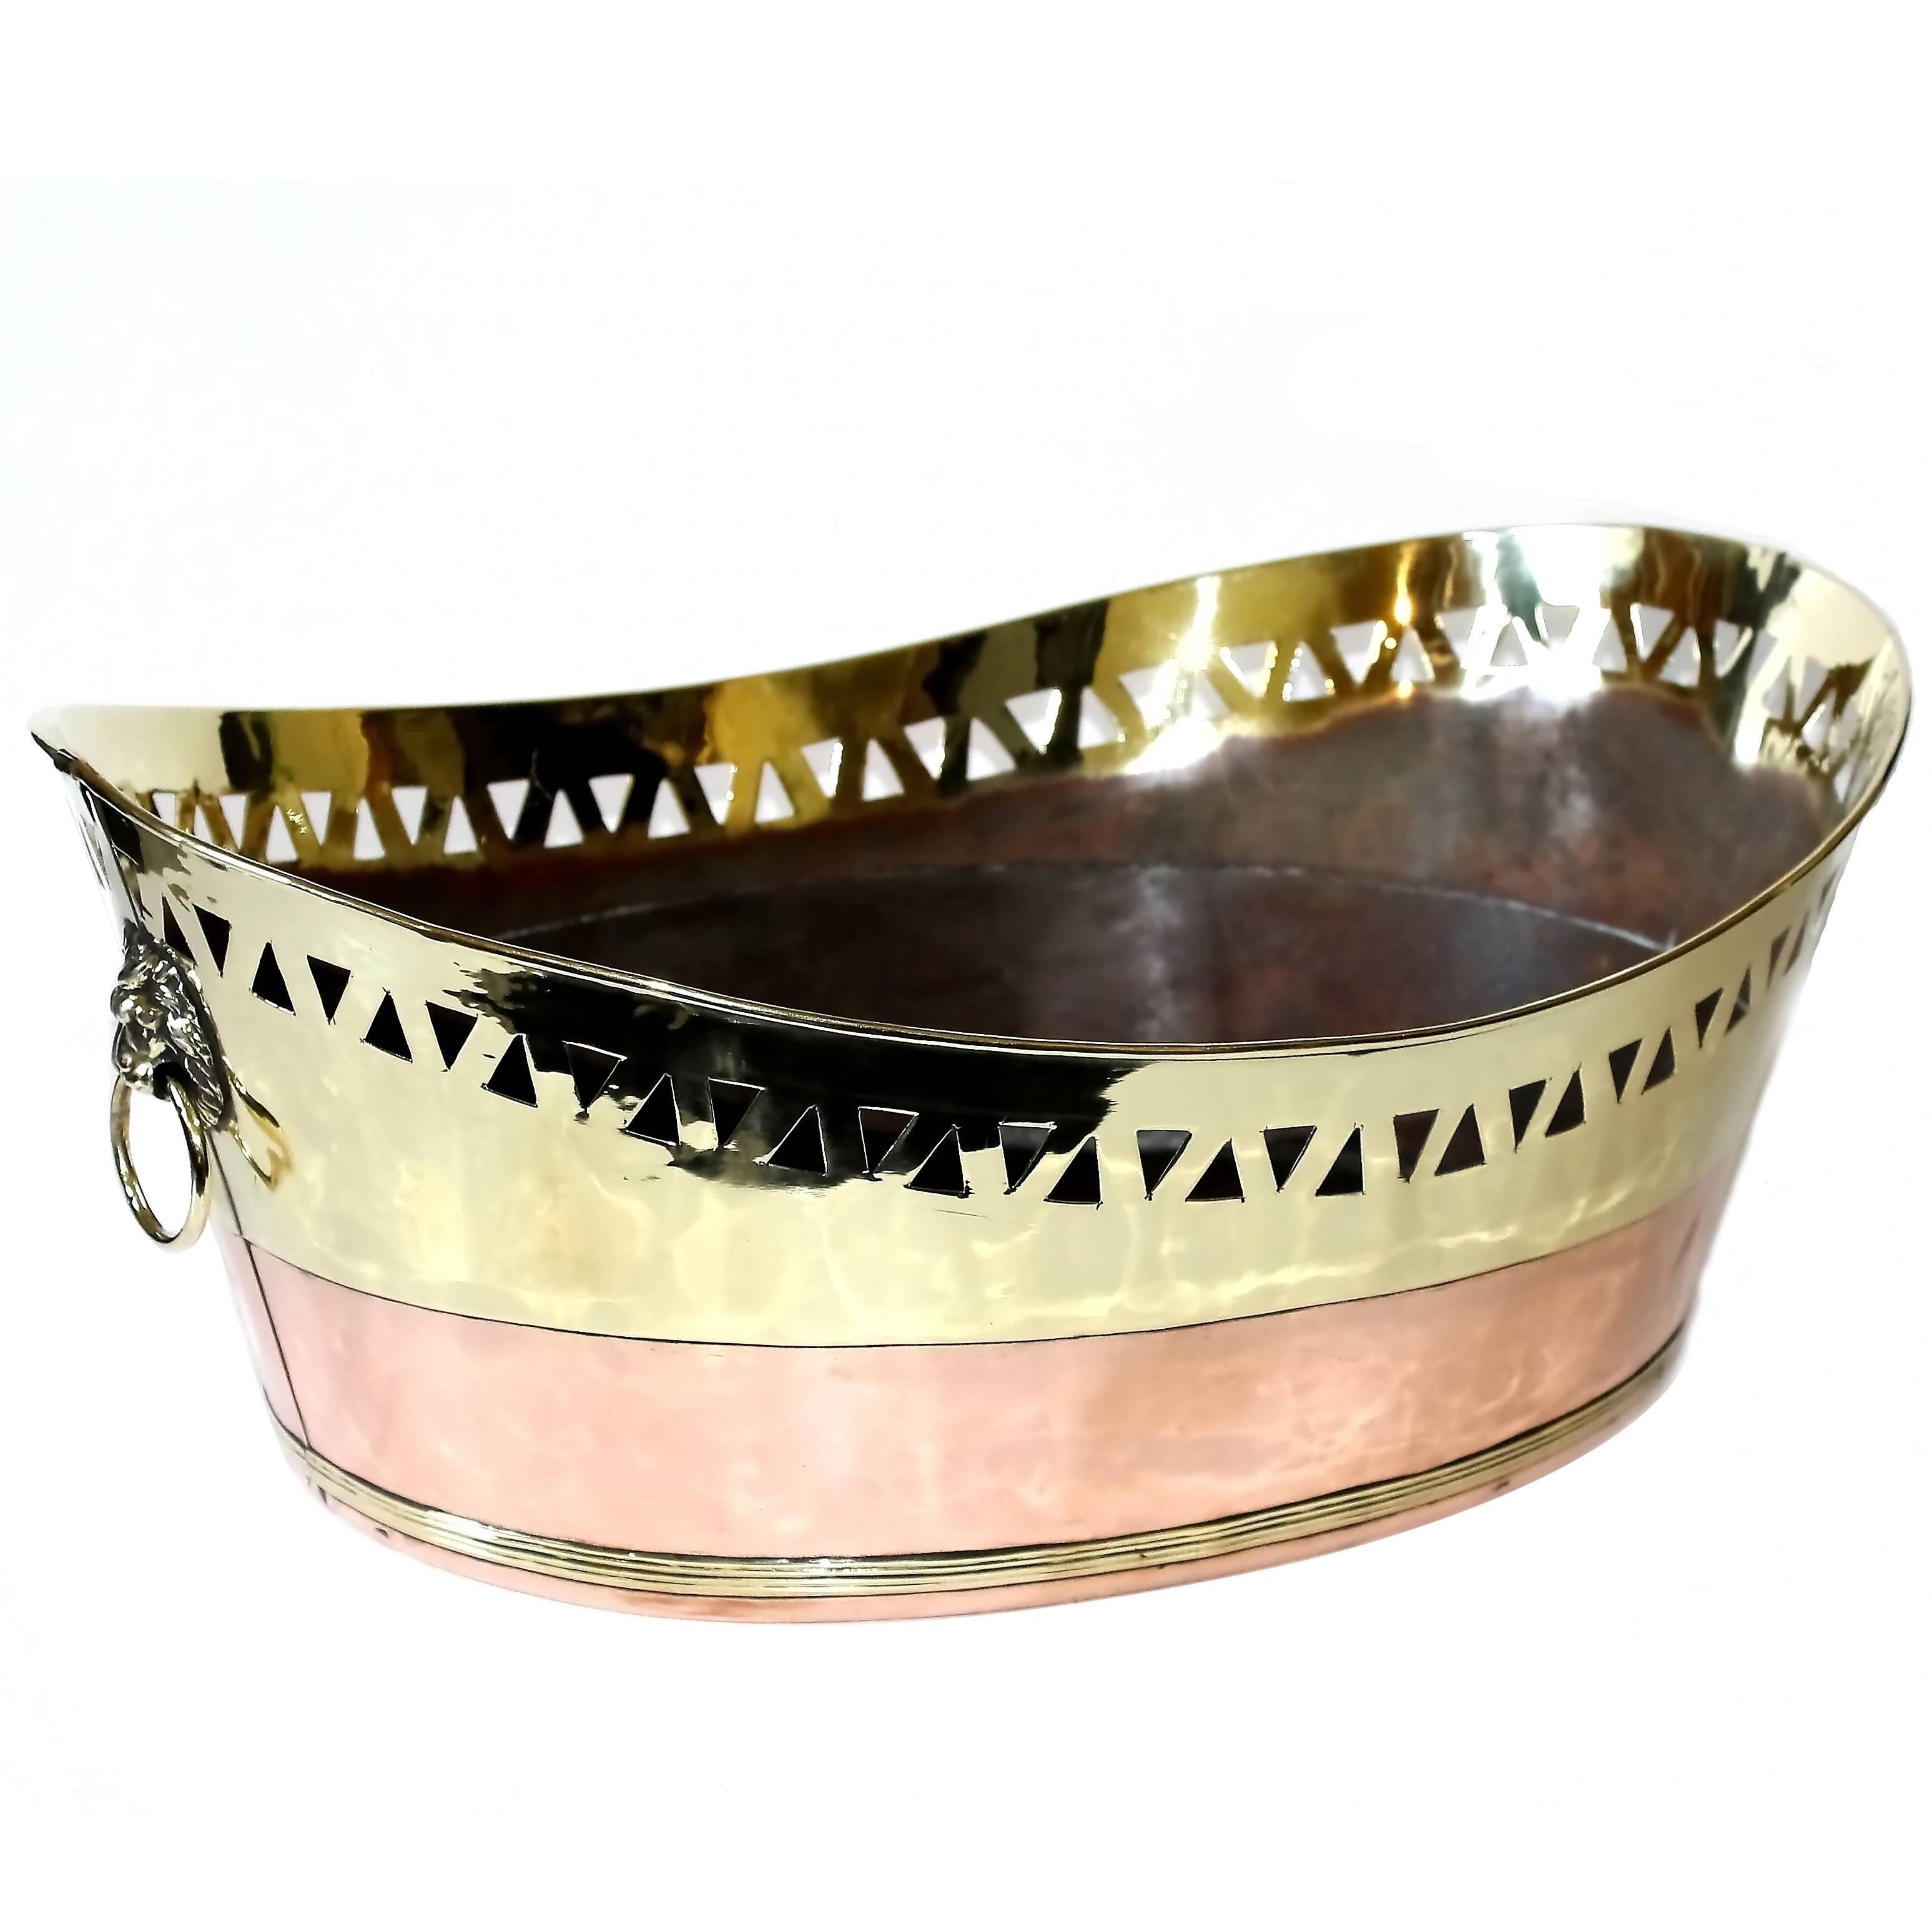 Dutch Brass and Copper Bread Basket For Sale